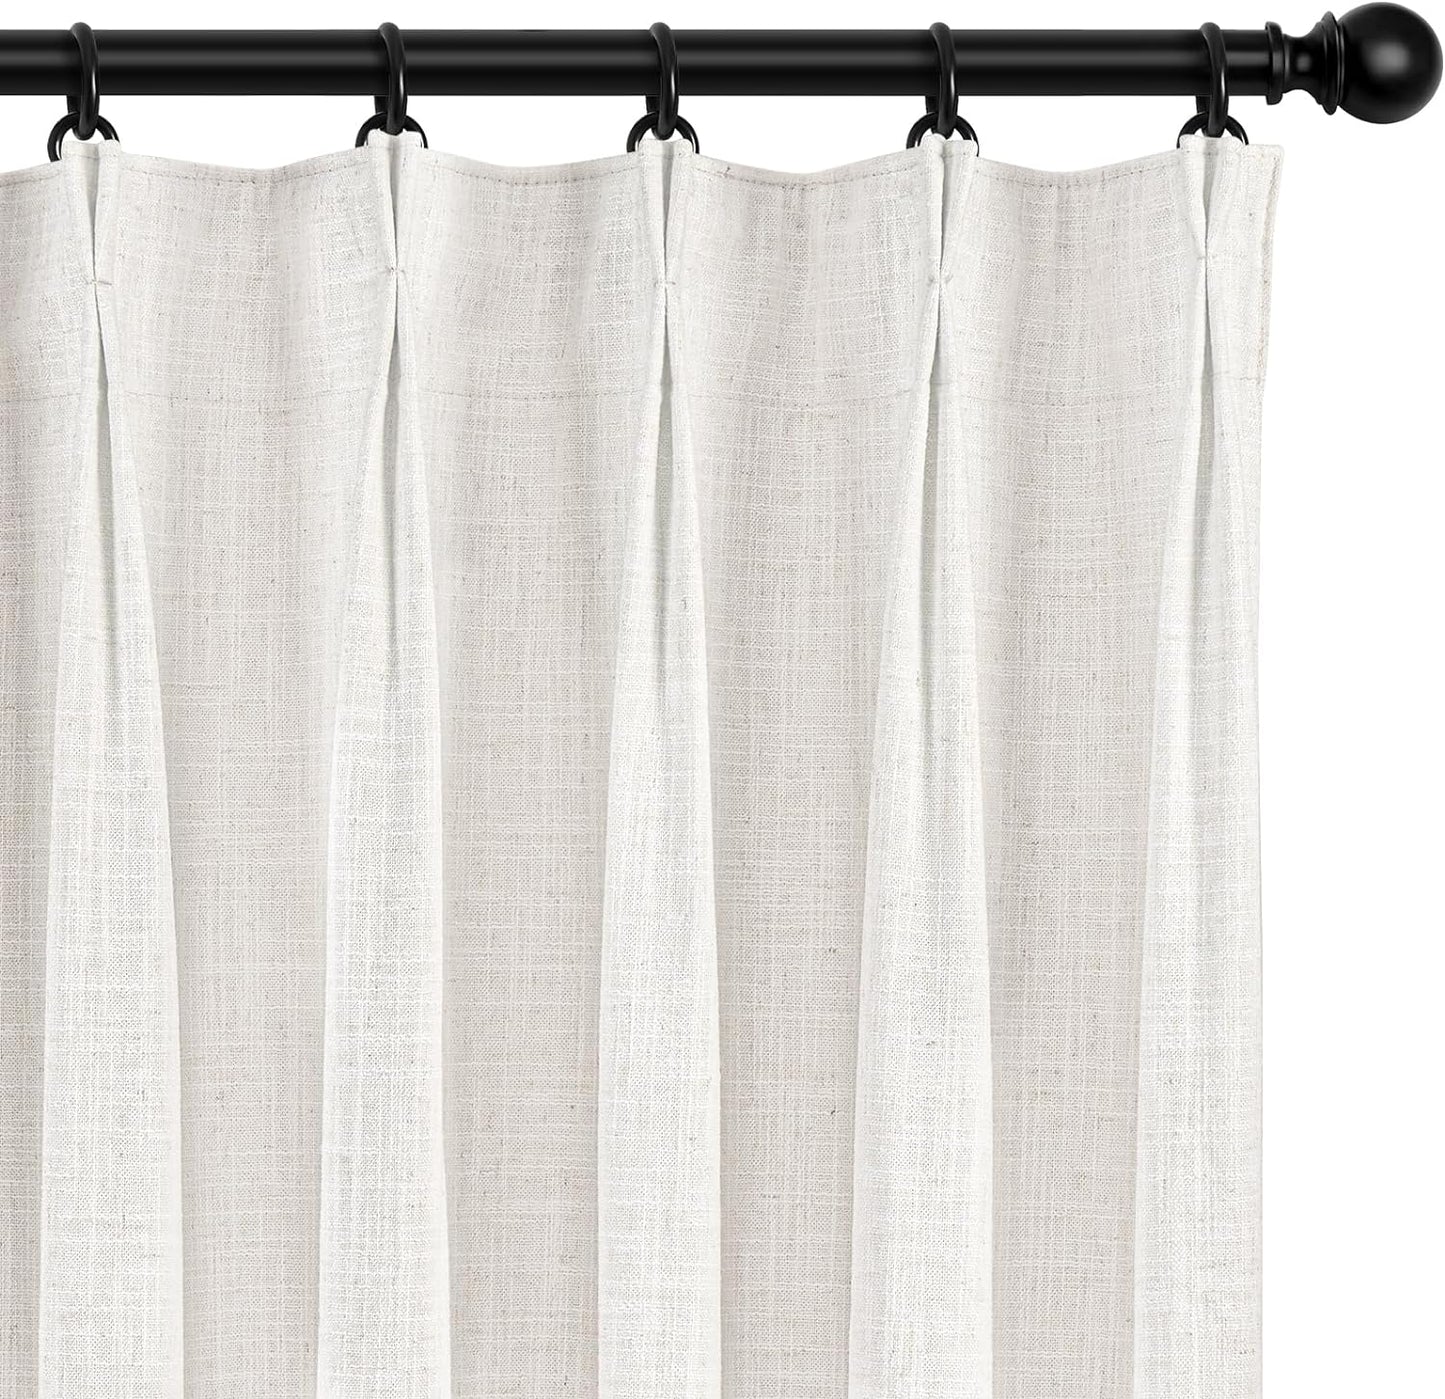 INOVADAY 100% Blackout Curtains for Bedroom, Pinch Pleated Linen Blackout Curtains 96 Inch Length 2 Panels Set, Thermal Room Darkening Linen Curtain Drapes for Living Room, W40 X L96,Beige White  INOVADAY Beige White 40"W X 120"L-2 Panels 